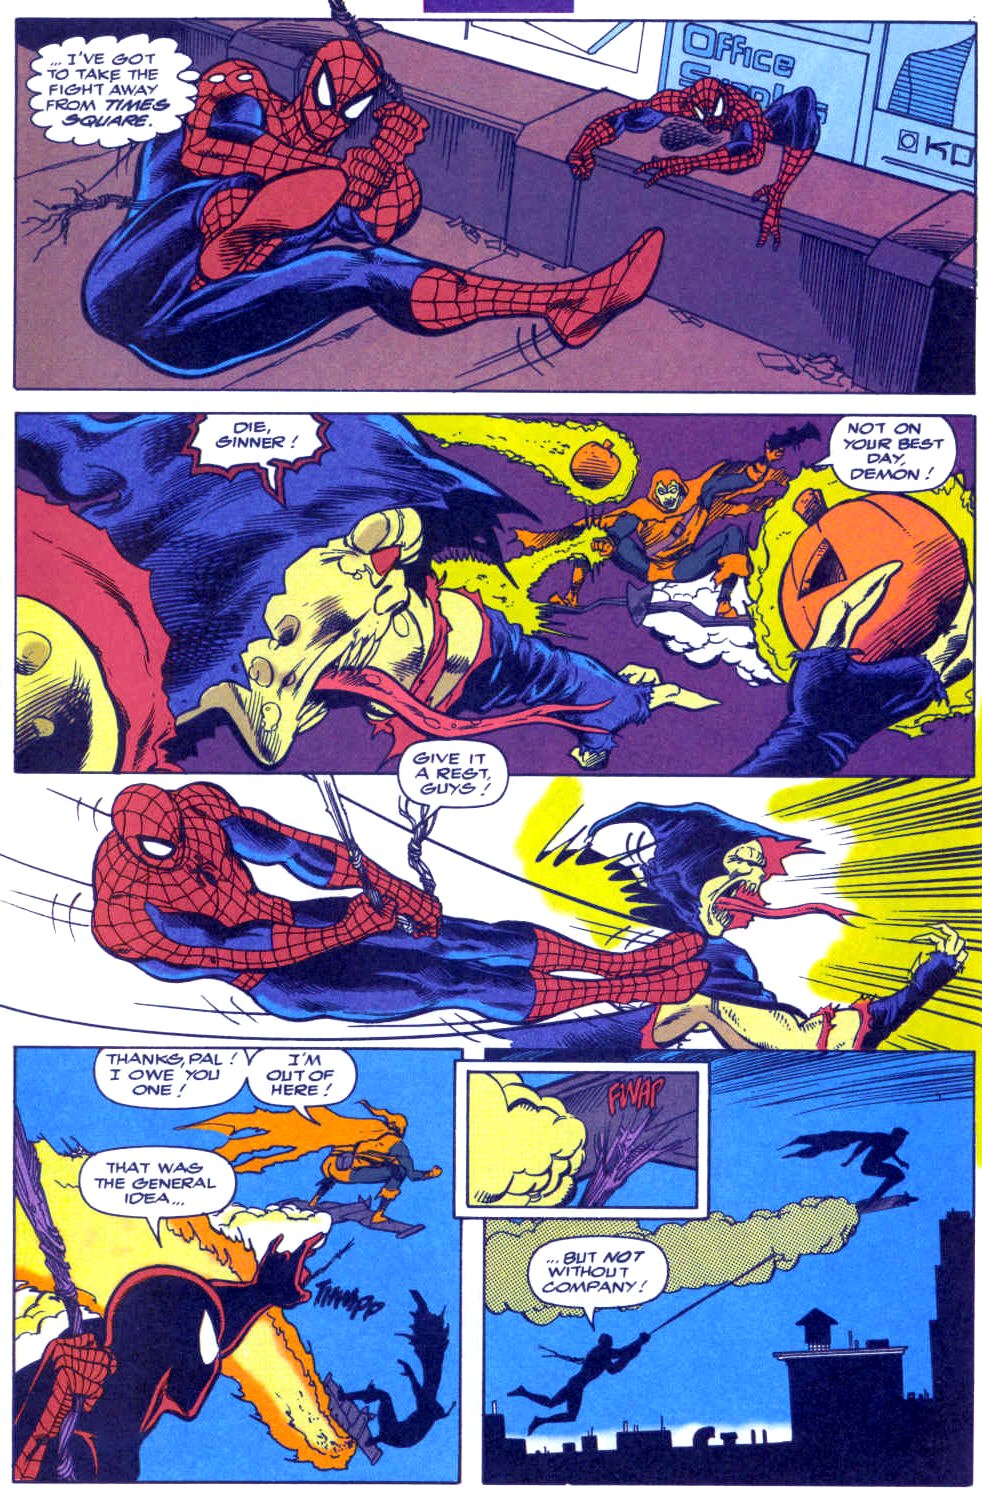 Spider-Man (1990) 24_-_Double_Infinity Page 16